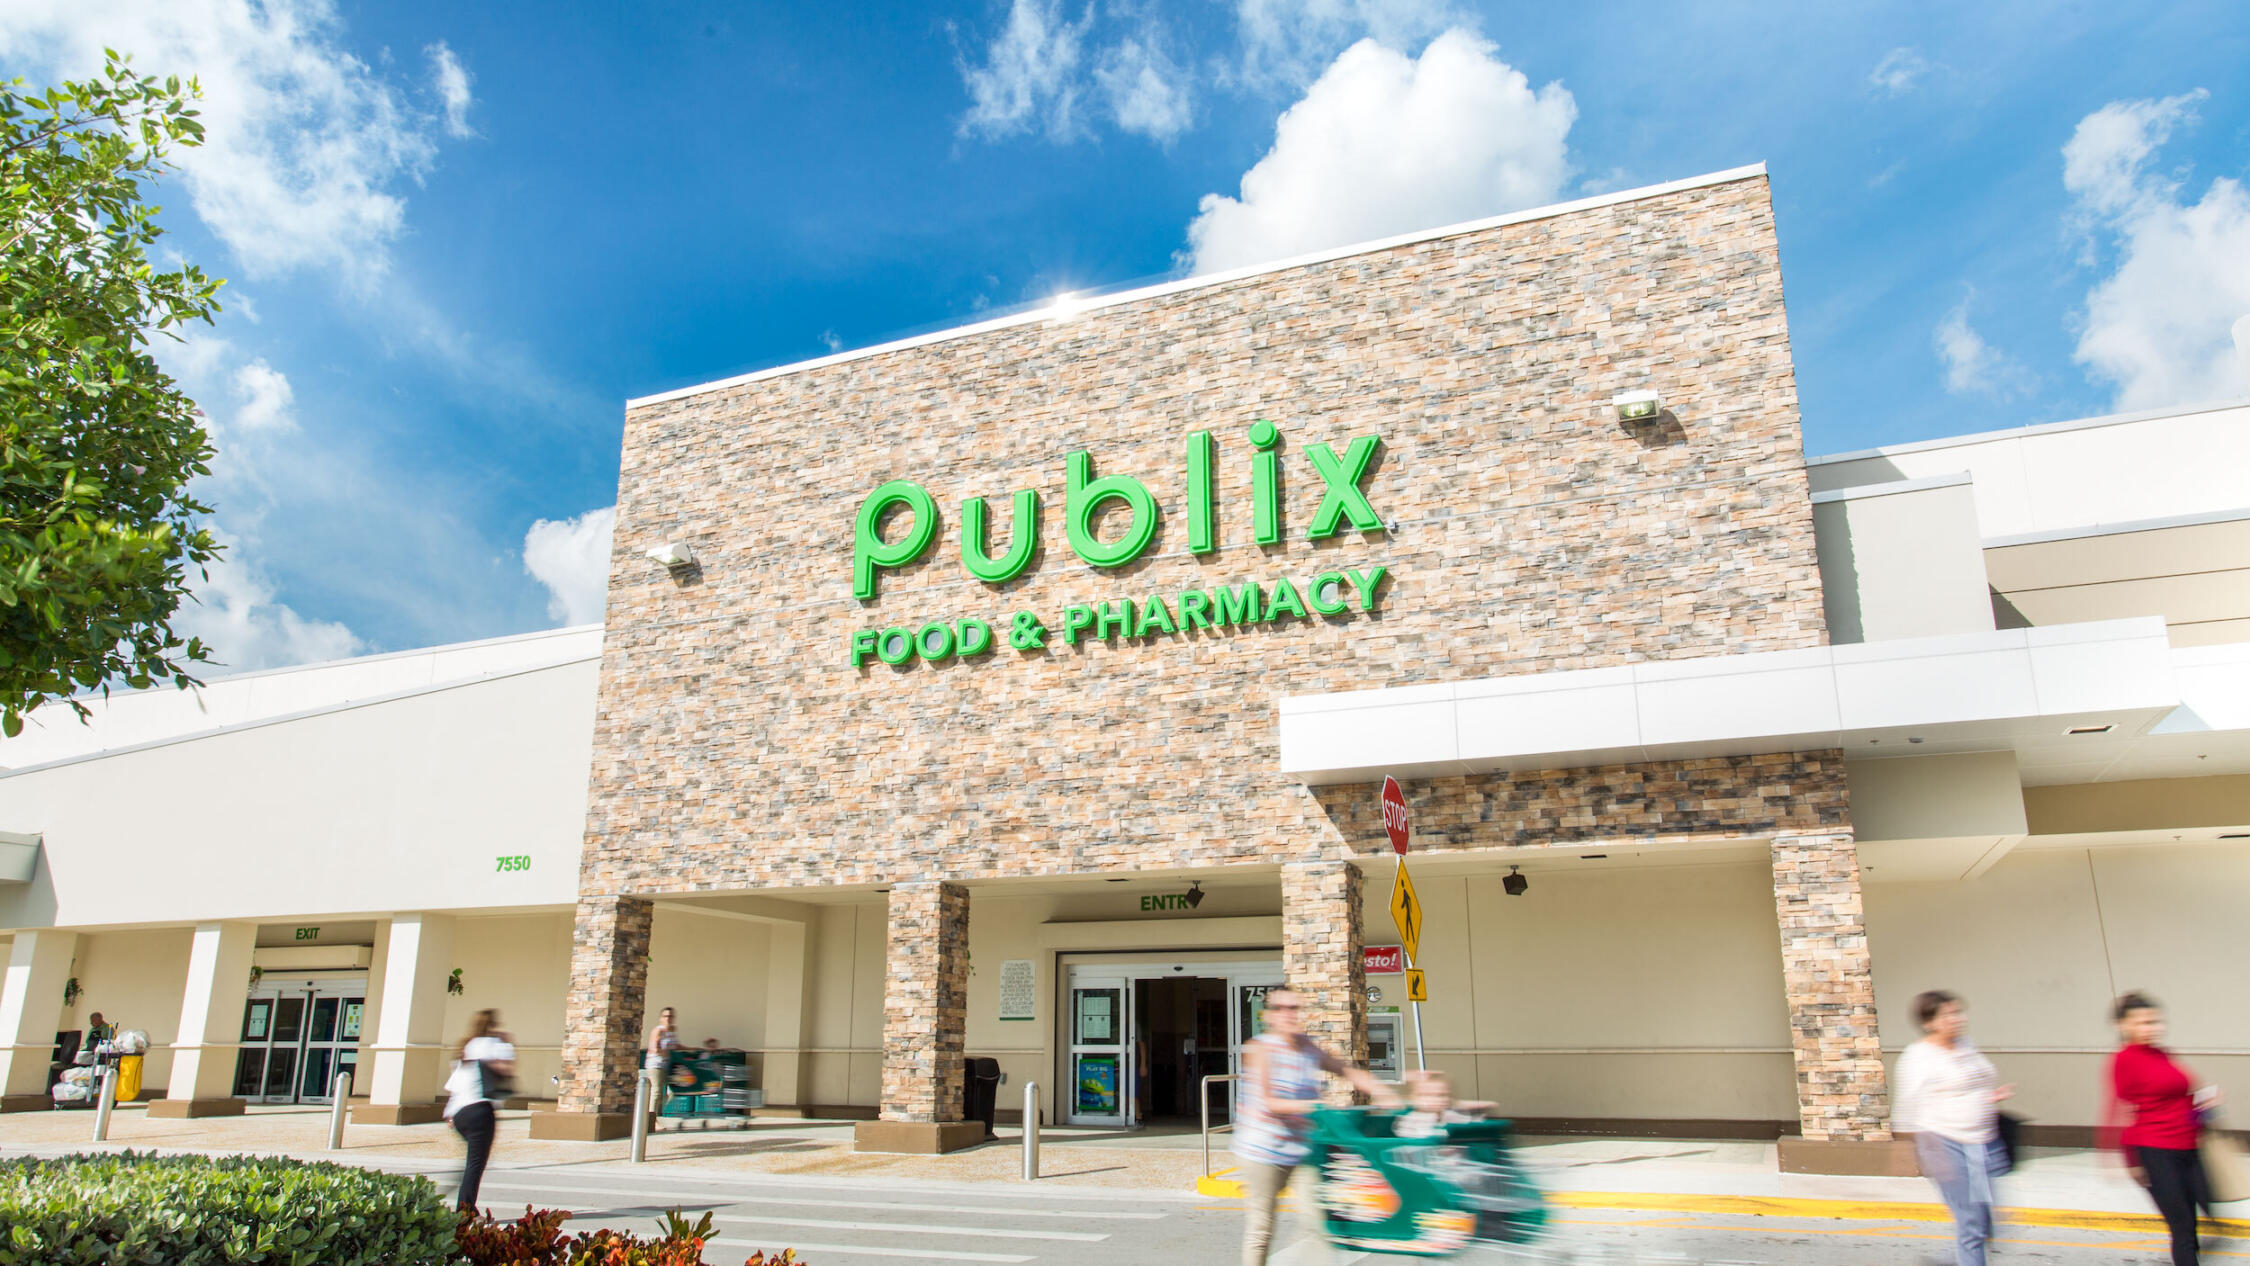 Doral Commons grocery store exterior with pedestrians crossing driveway